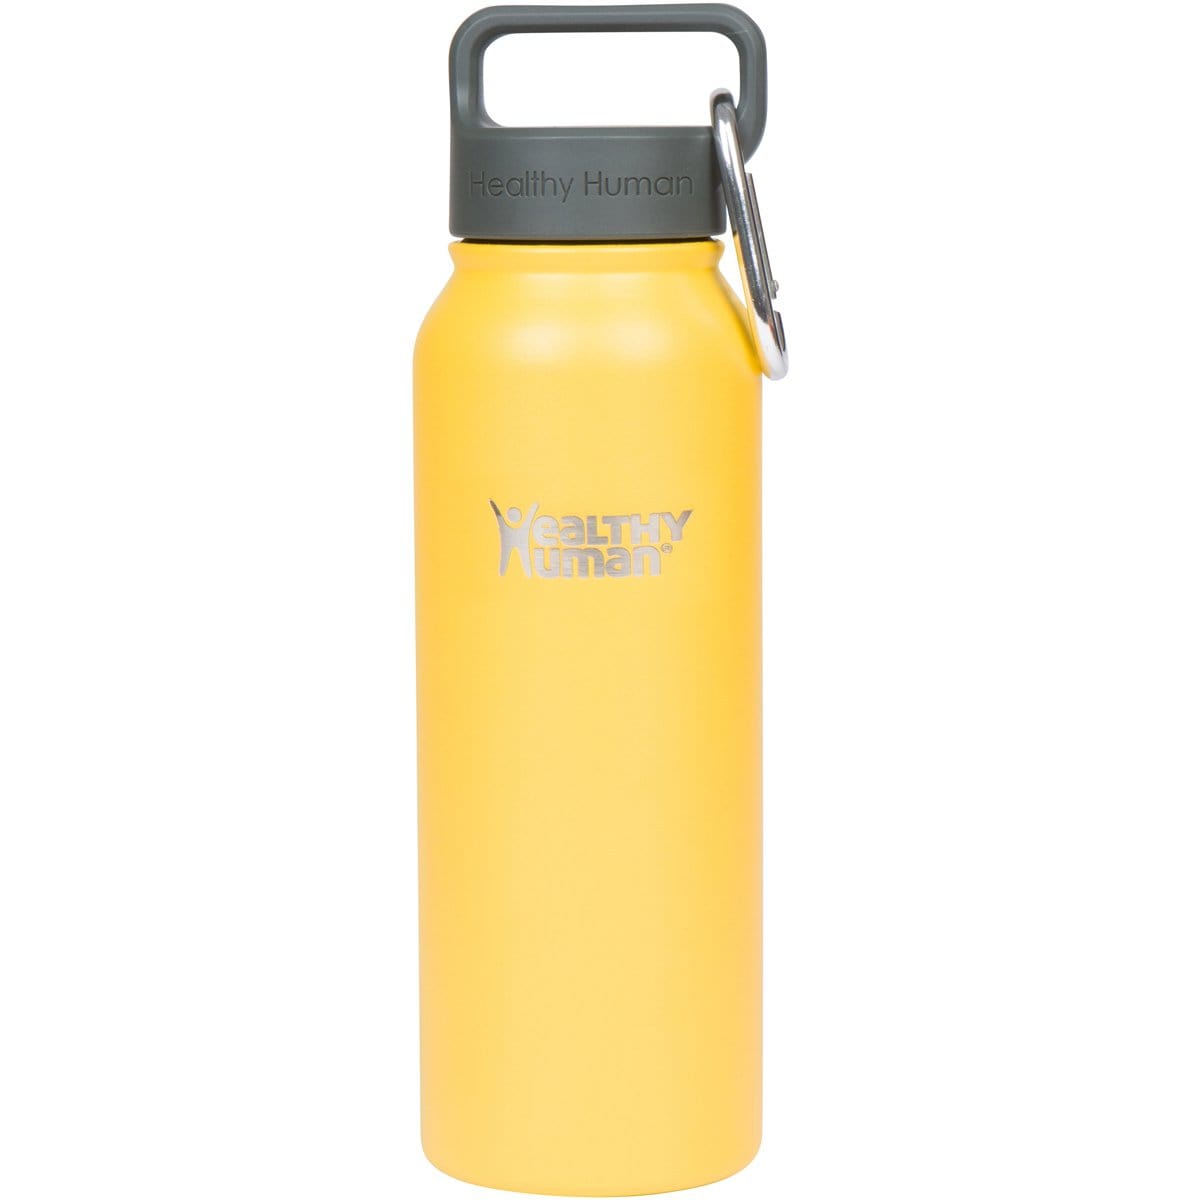 21oz Metal Insulated Water Bottle - Highland Brewing